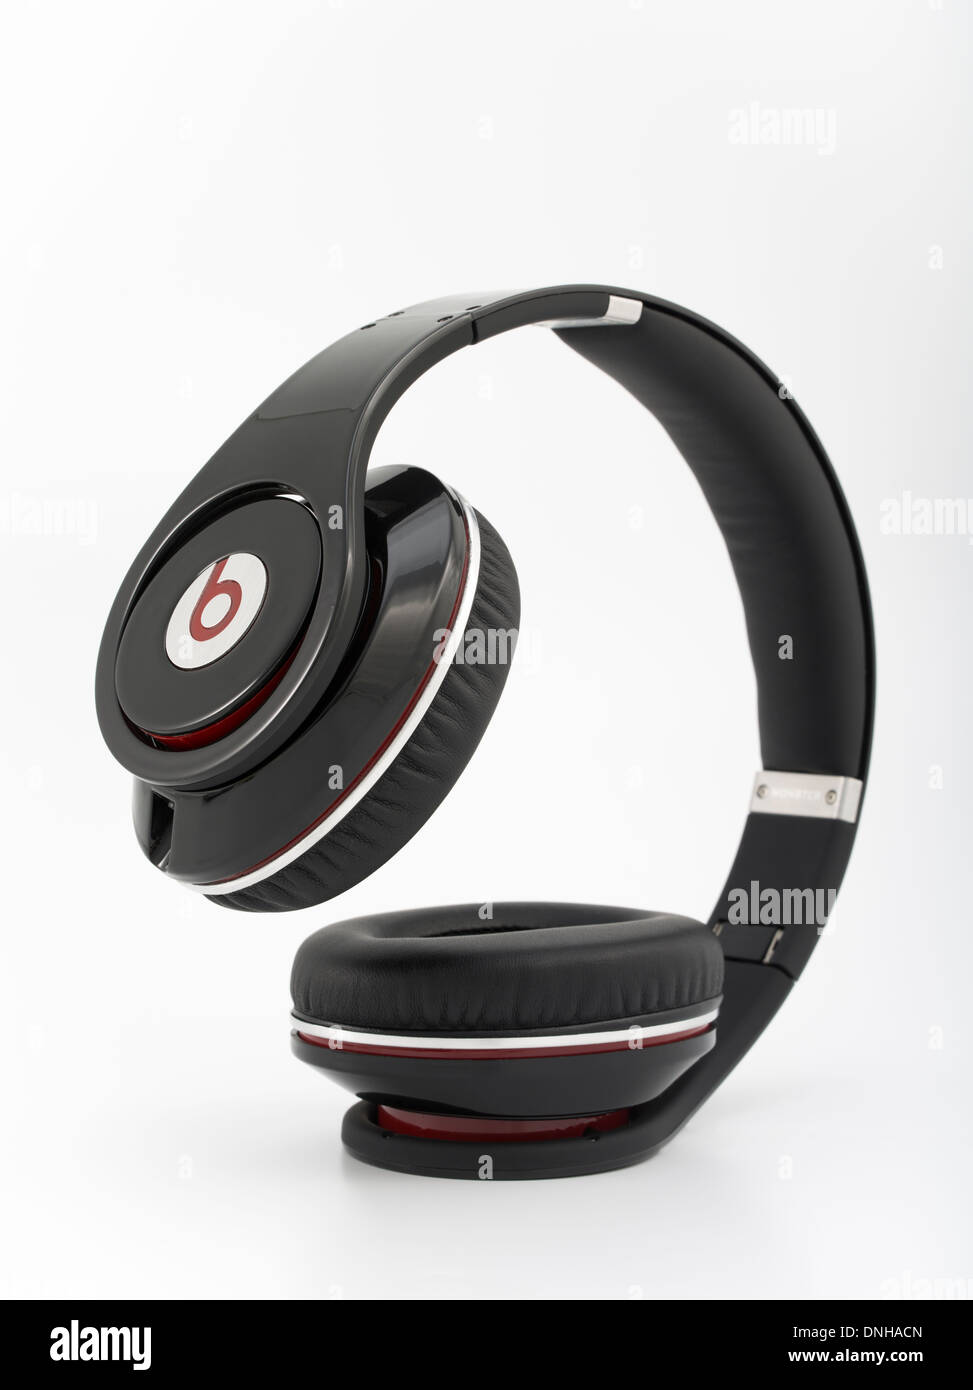 Beats by Dr. Dre studio headphones 2008 produced by Monster Cable. Iconic gadget / audio equipment. Stock Photo